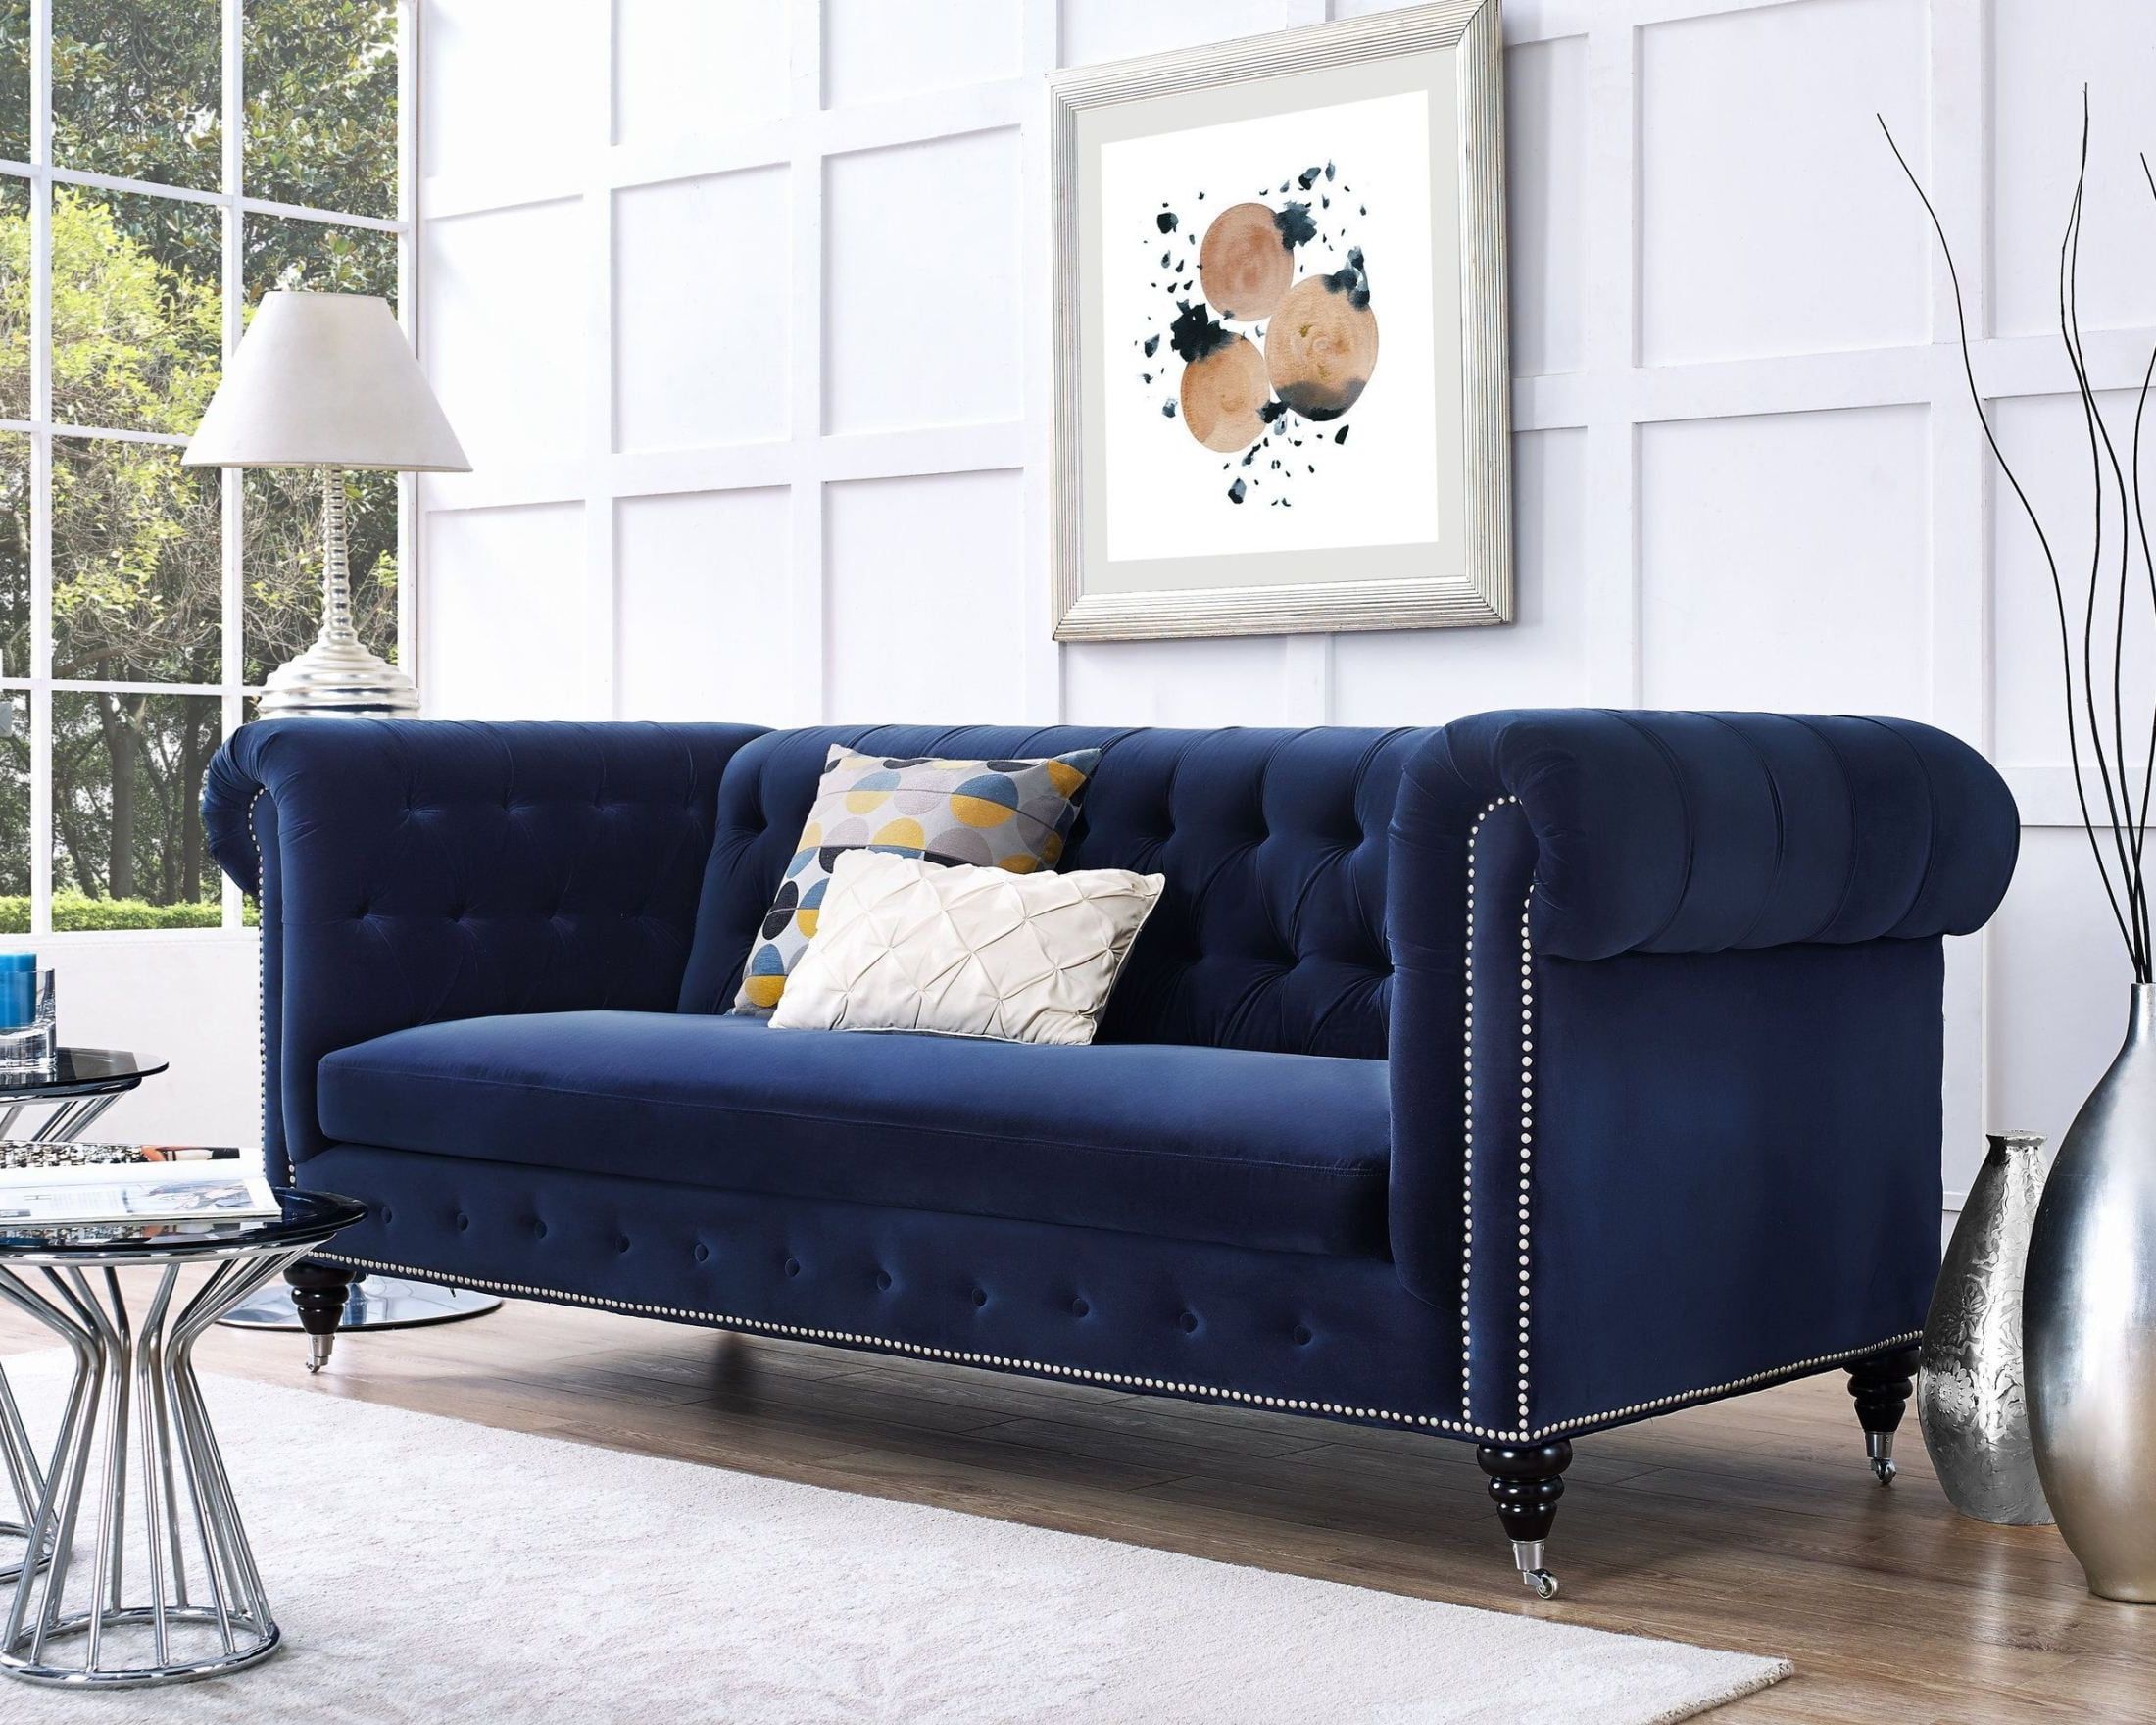 Hanny Navy Blue Velvet Sofa From Tov | Coleman Furniture Intended For Sofas In Blue (Gallery 13 of 20)